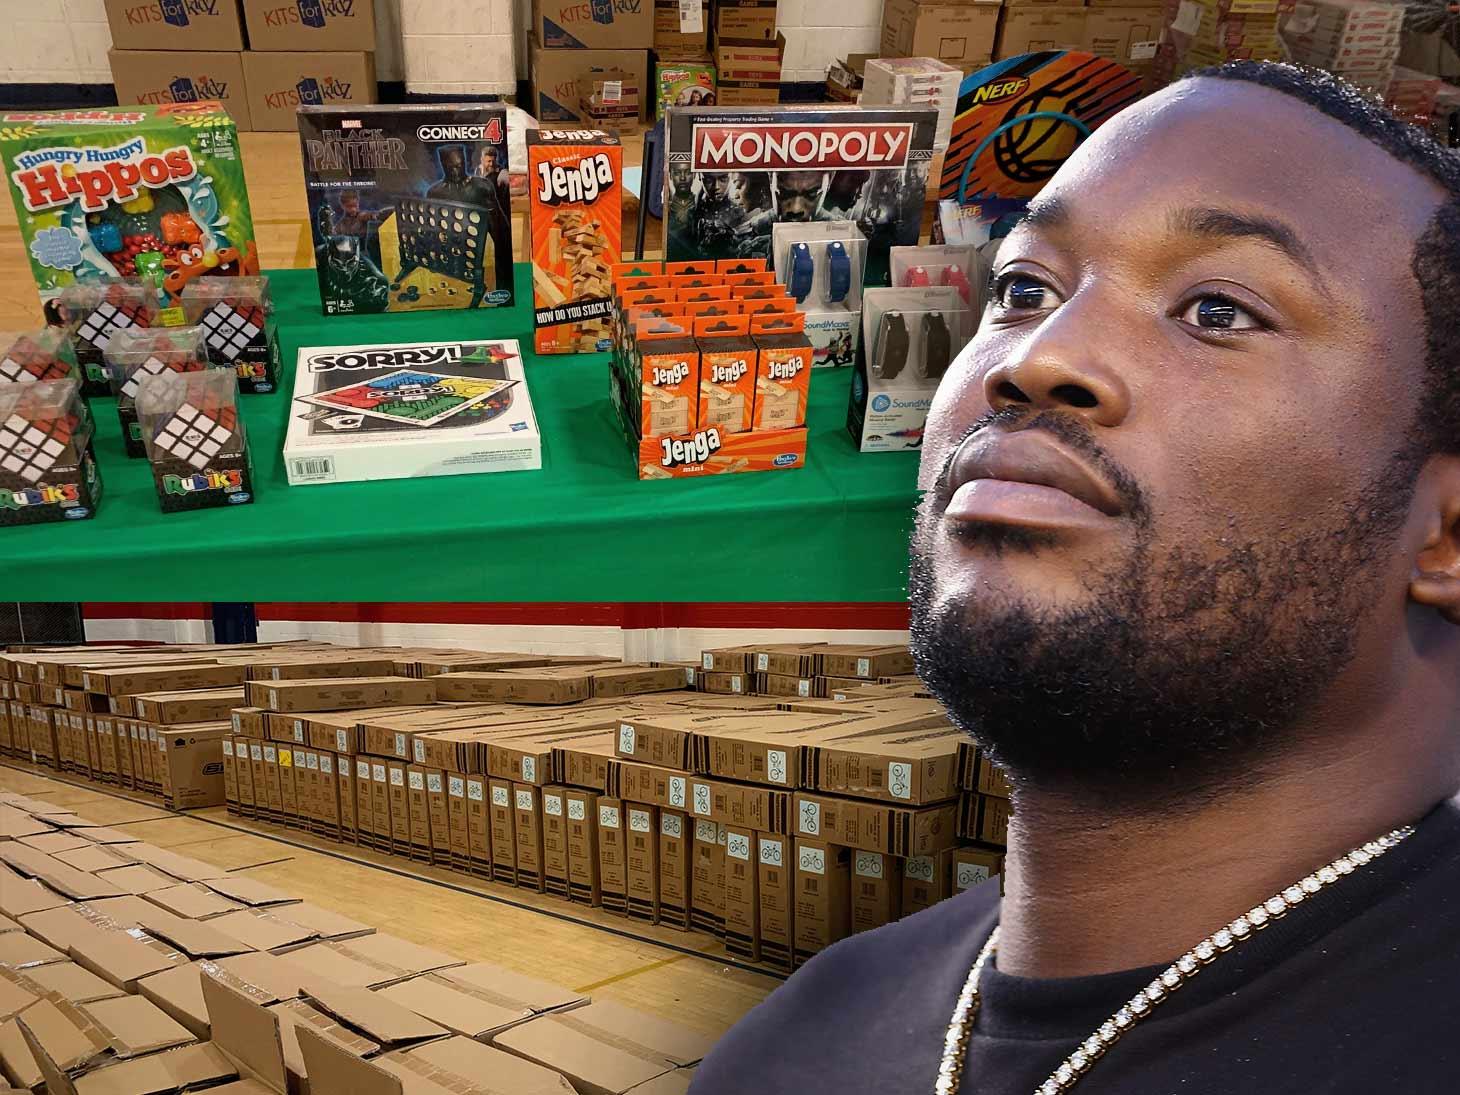 Meek Mill Gifts Kid a Second Xbox After First Gets Stolen Following Toy Giveaway